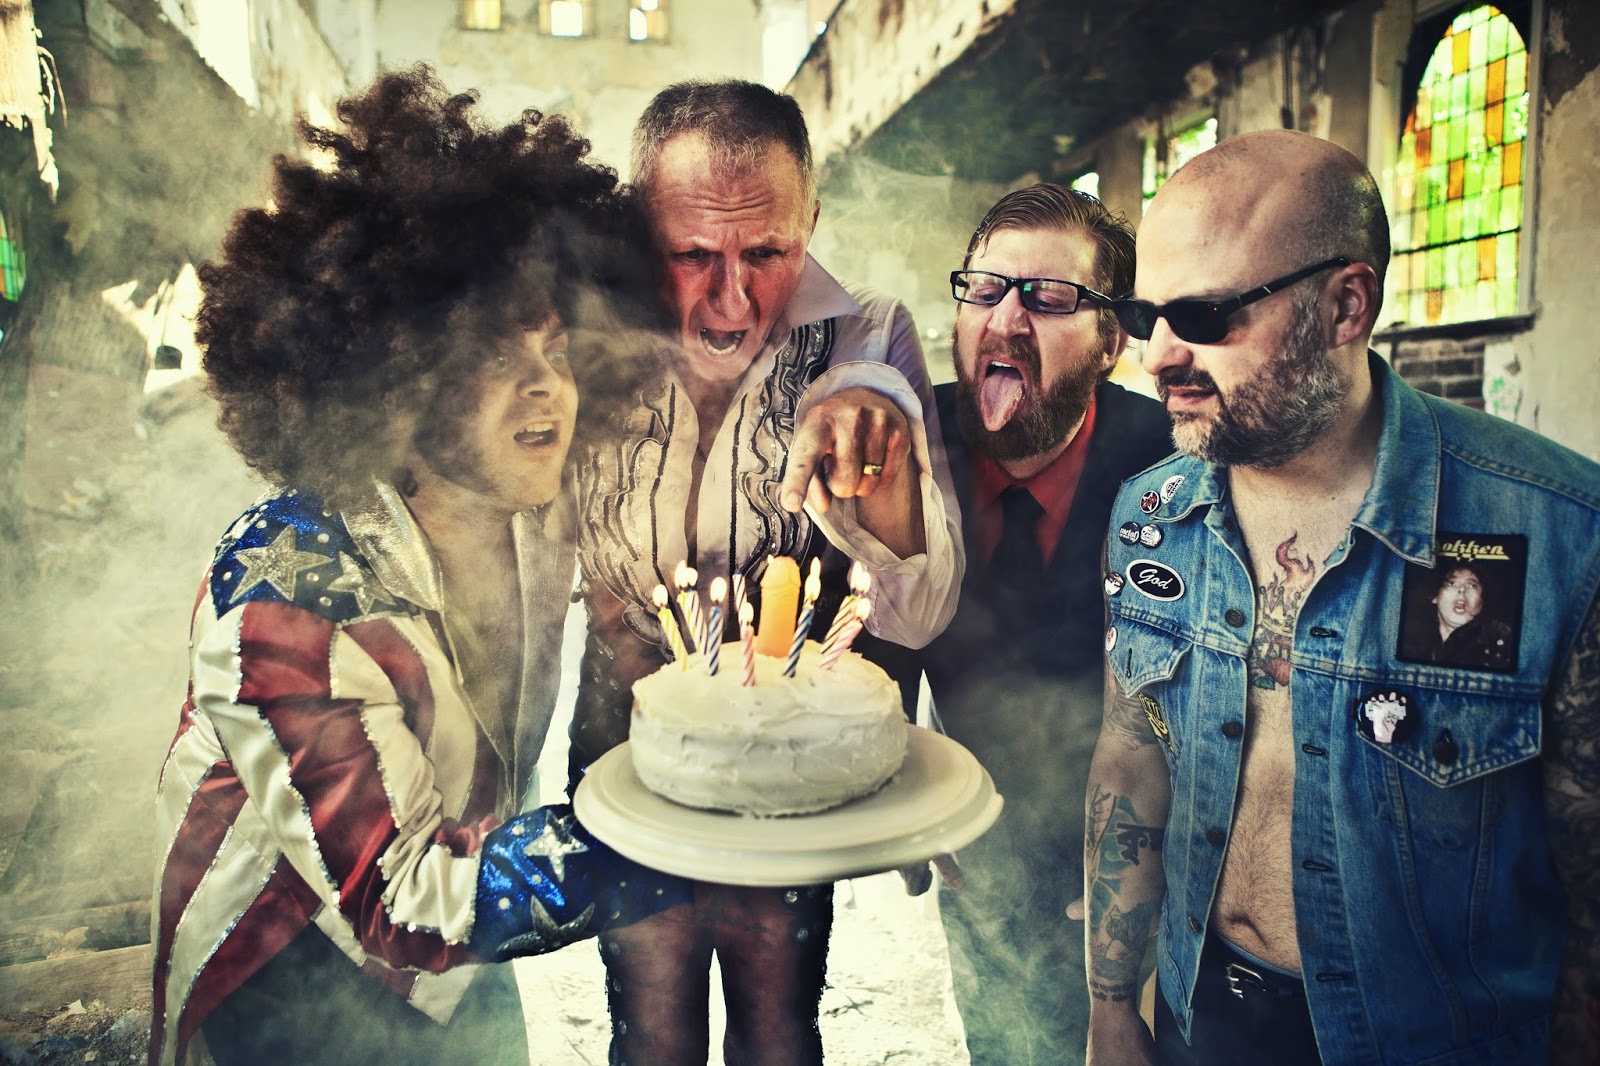 Bandmembers of The Meatmen staring and pointing at a cake with candles.